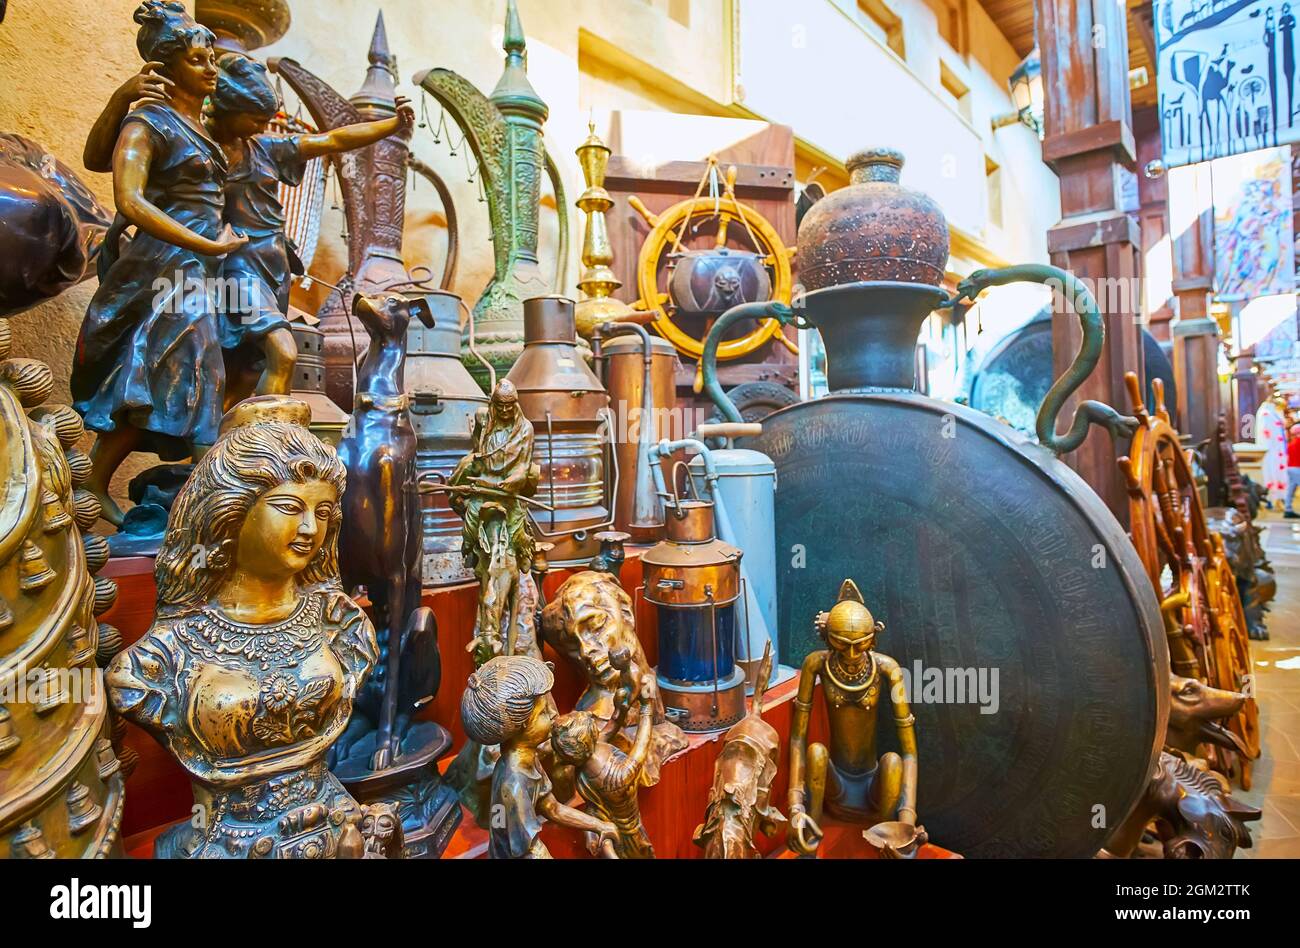 The vintage items (figurines, dallah coffee pots, lamps) on the counter of the vintage shop, Souk Madinat Jumeirah market, Dubai, UAE Stock Photo